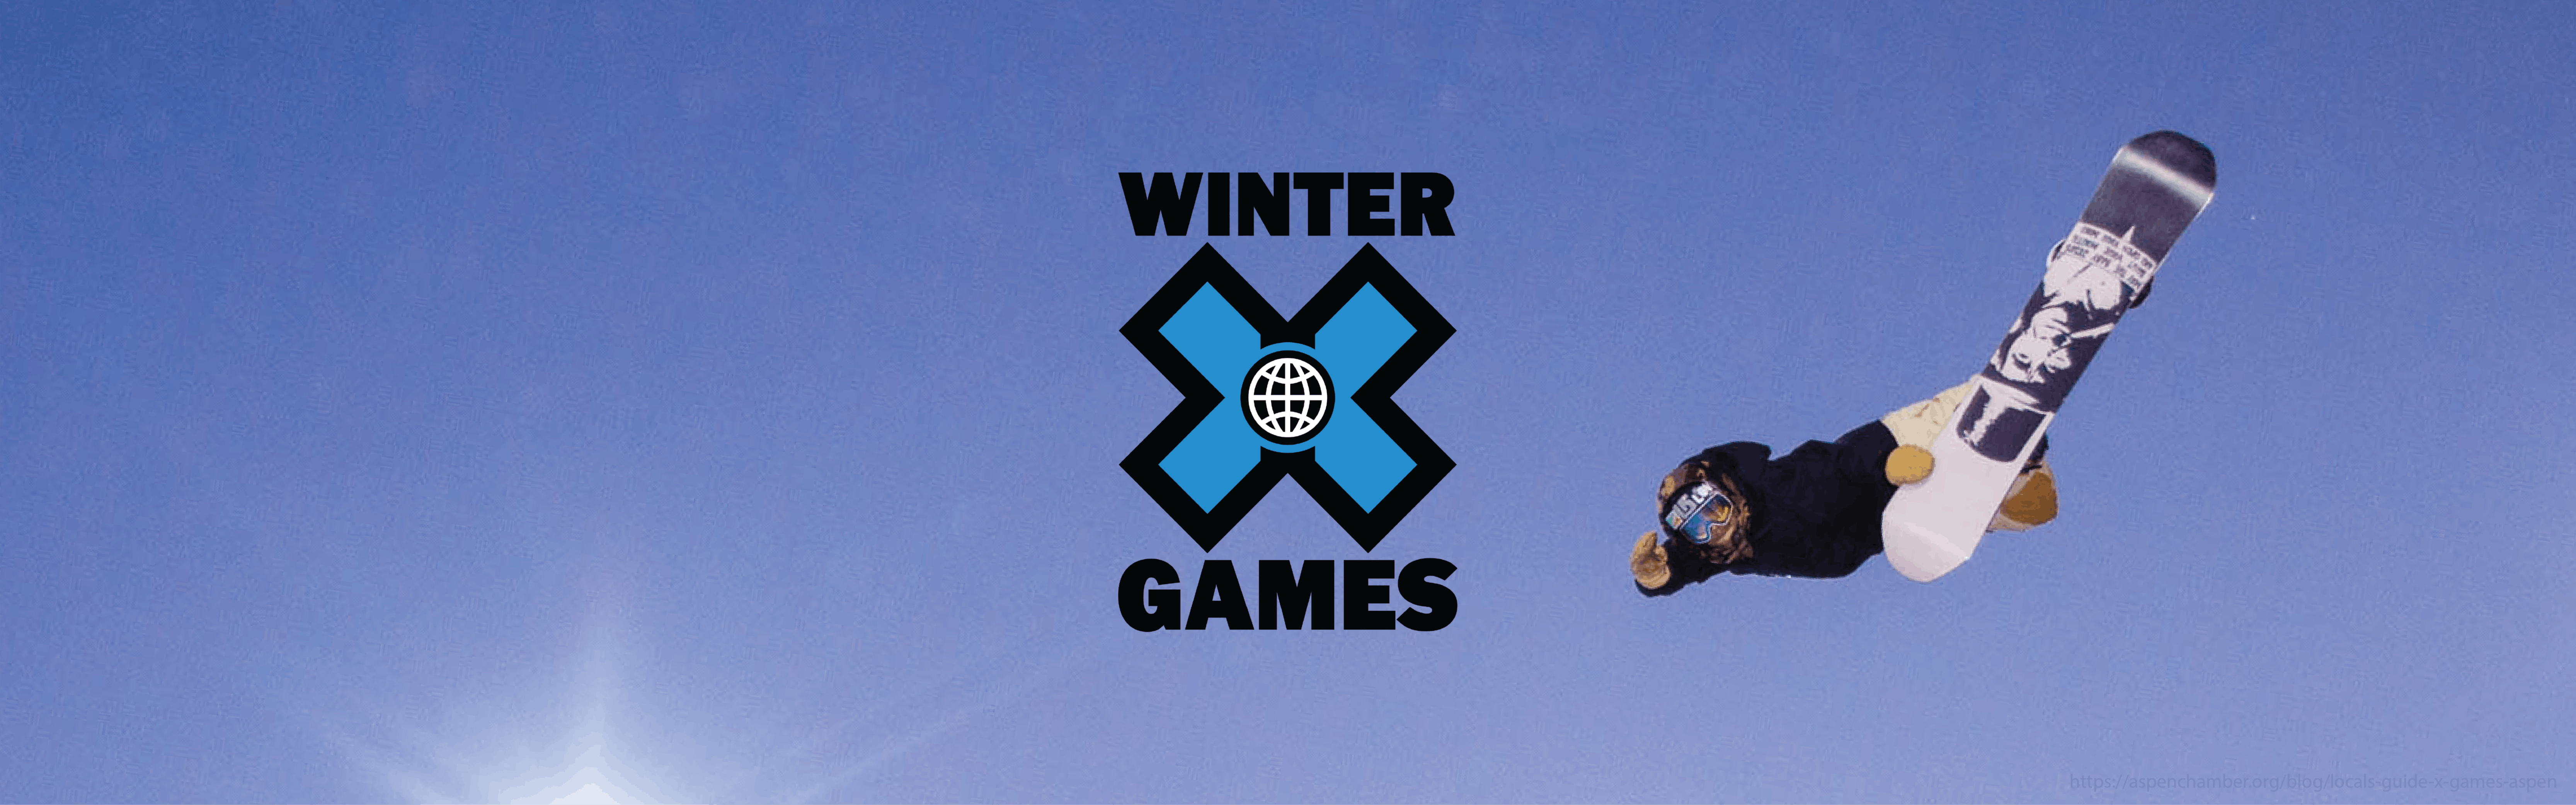 A snowboarder jumps against a blue sky with an added Winter X Games logo on top of the image.